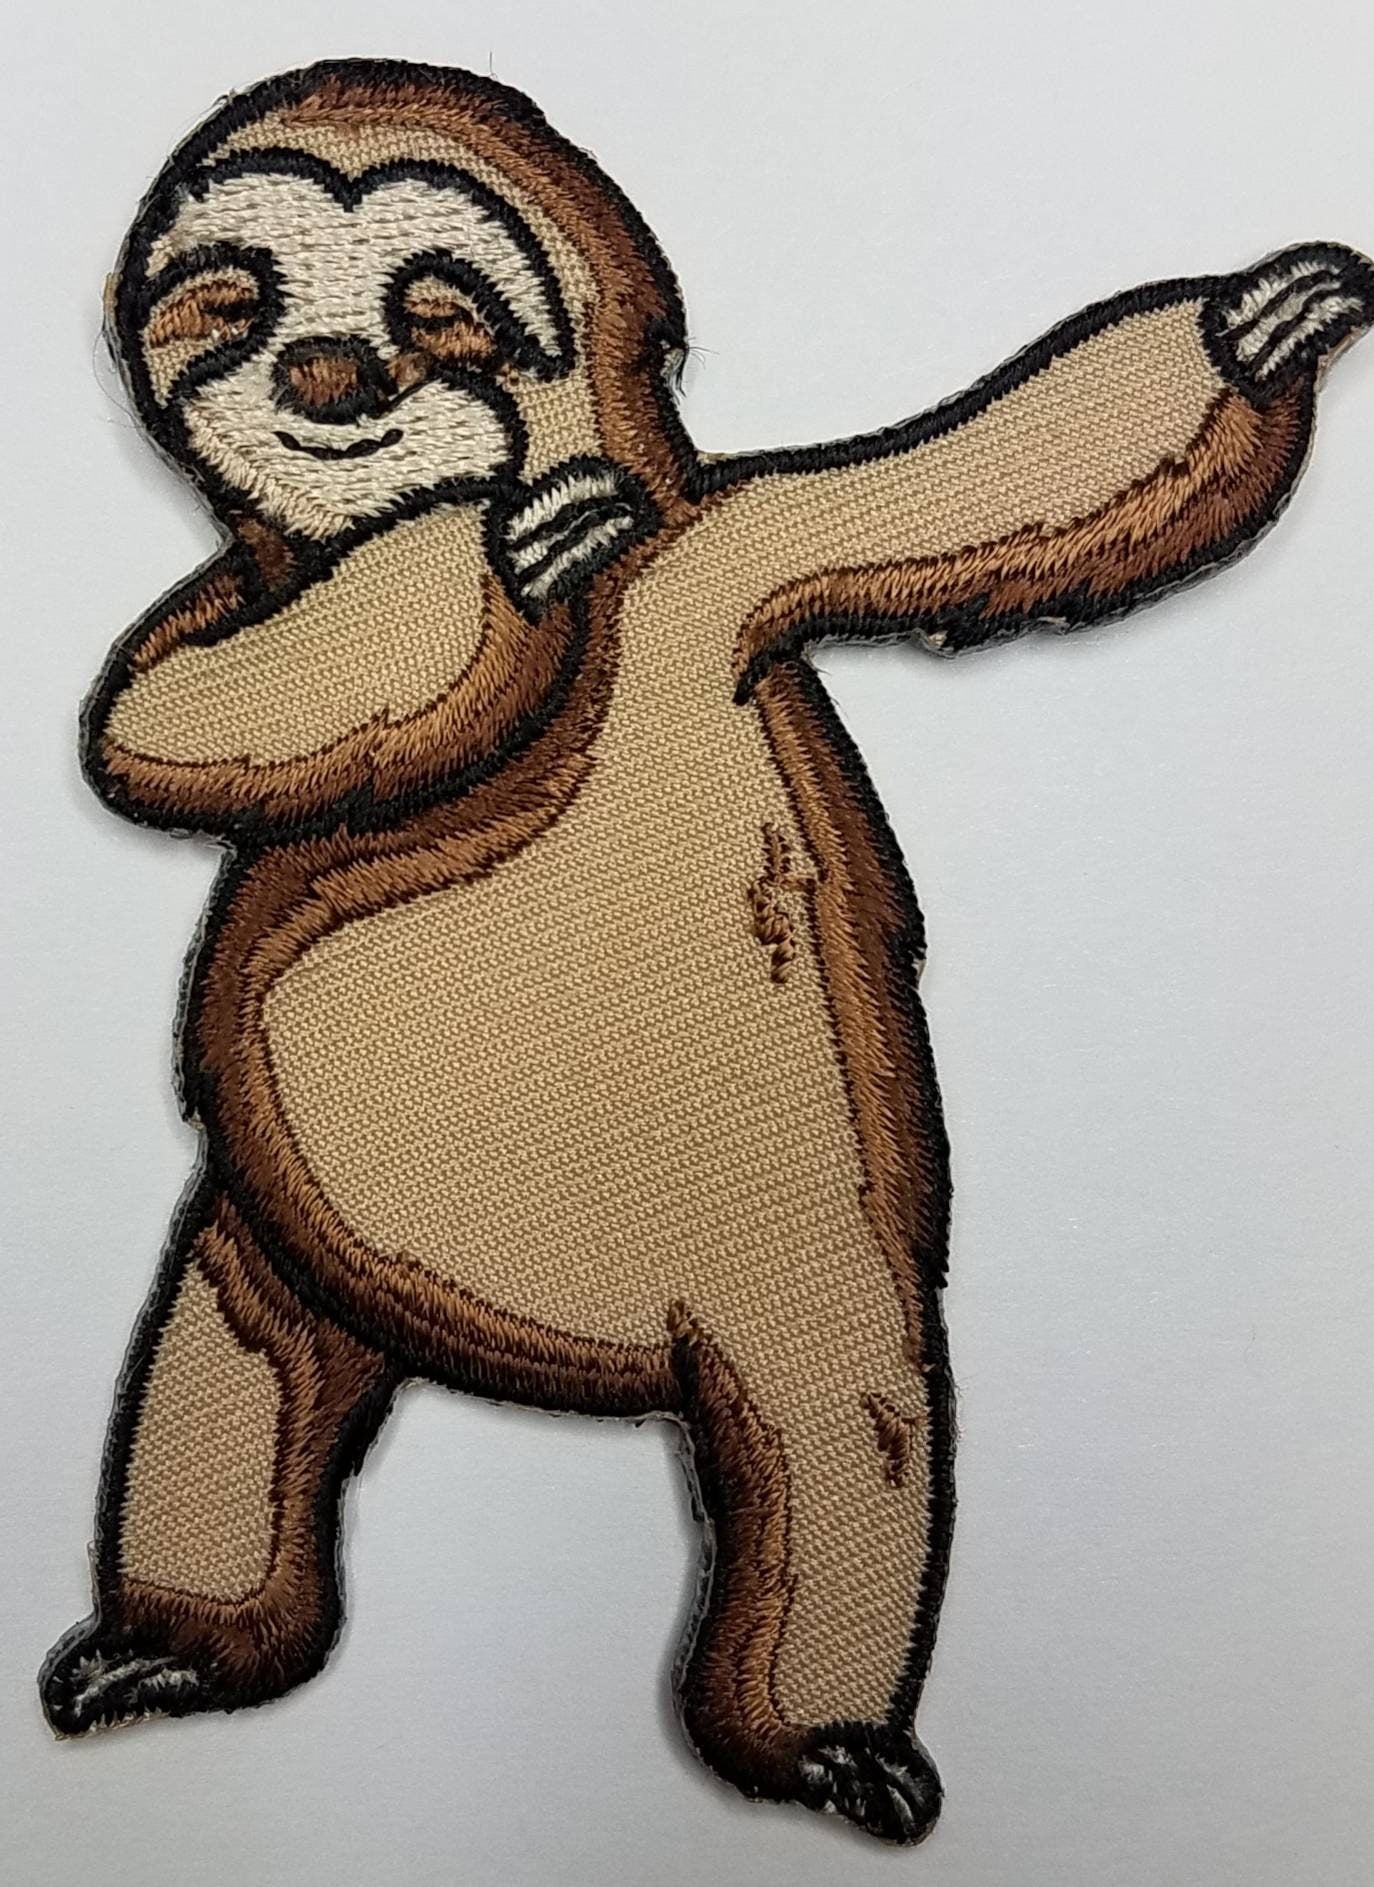 Cool, Sloth Patch "Dabbin' Slow" Iron-on Embroidered Patch, Size 3" Go Slow Sloth Applique